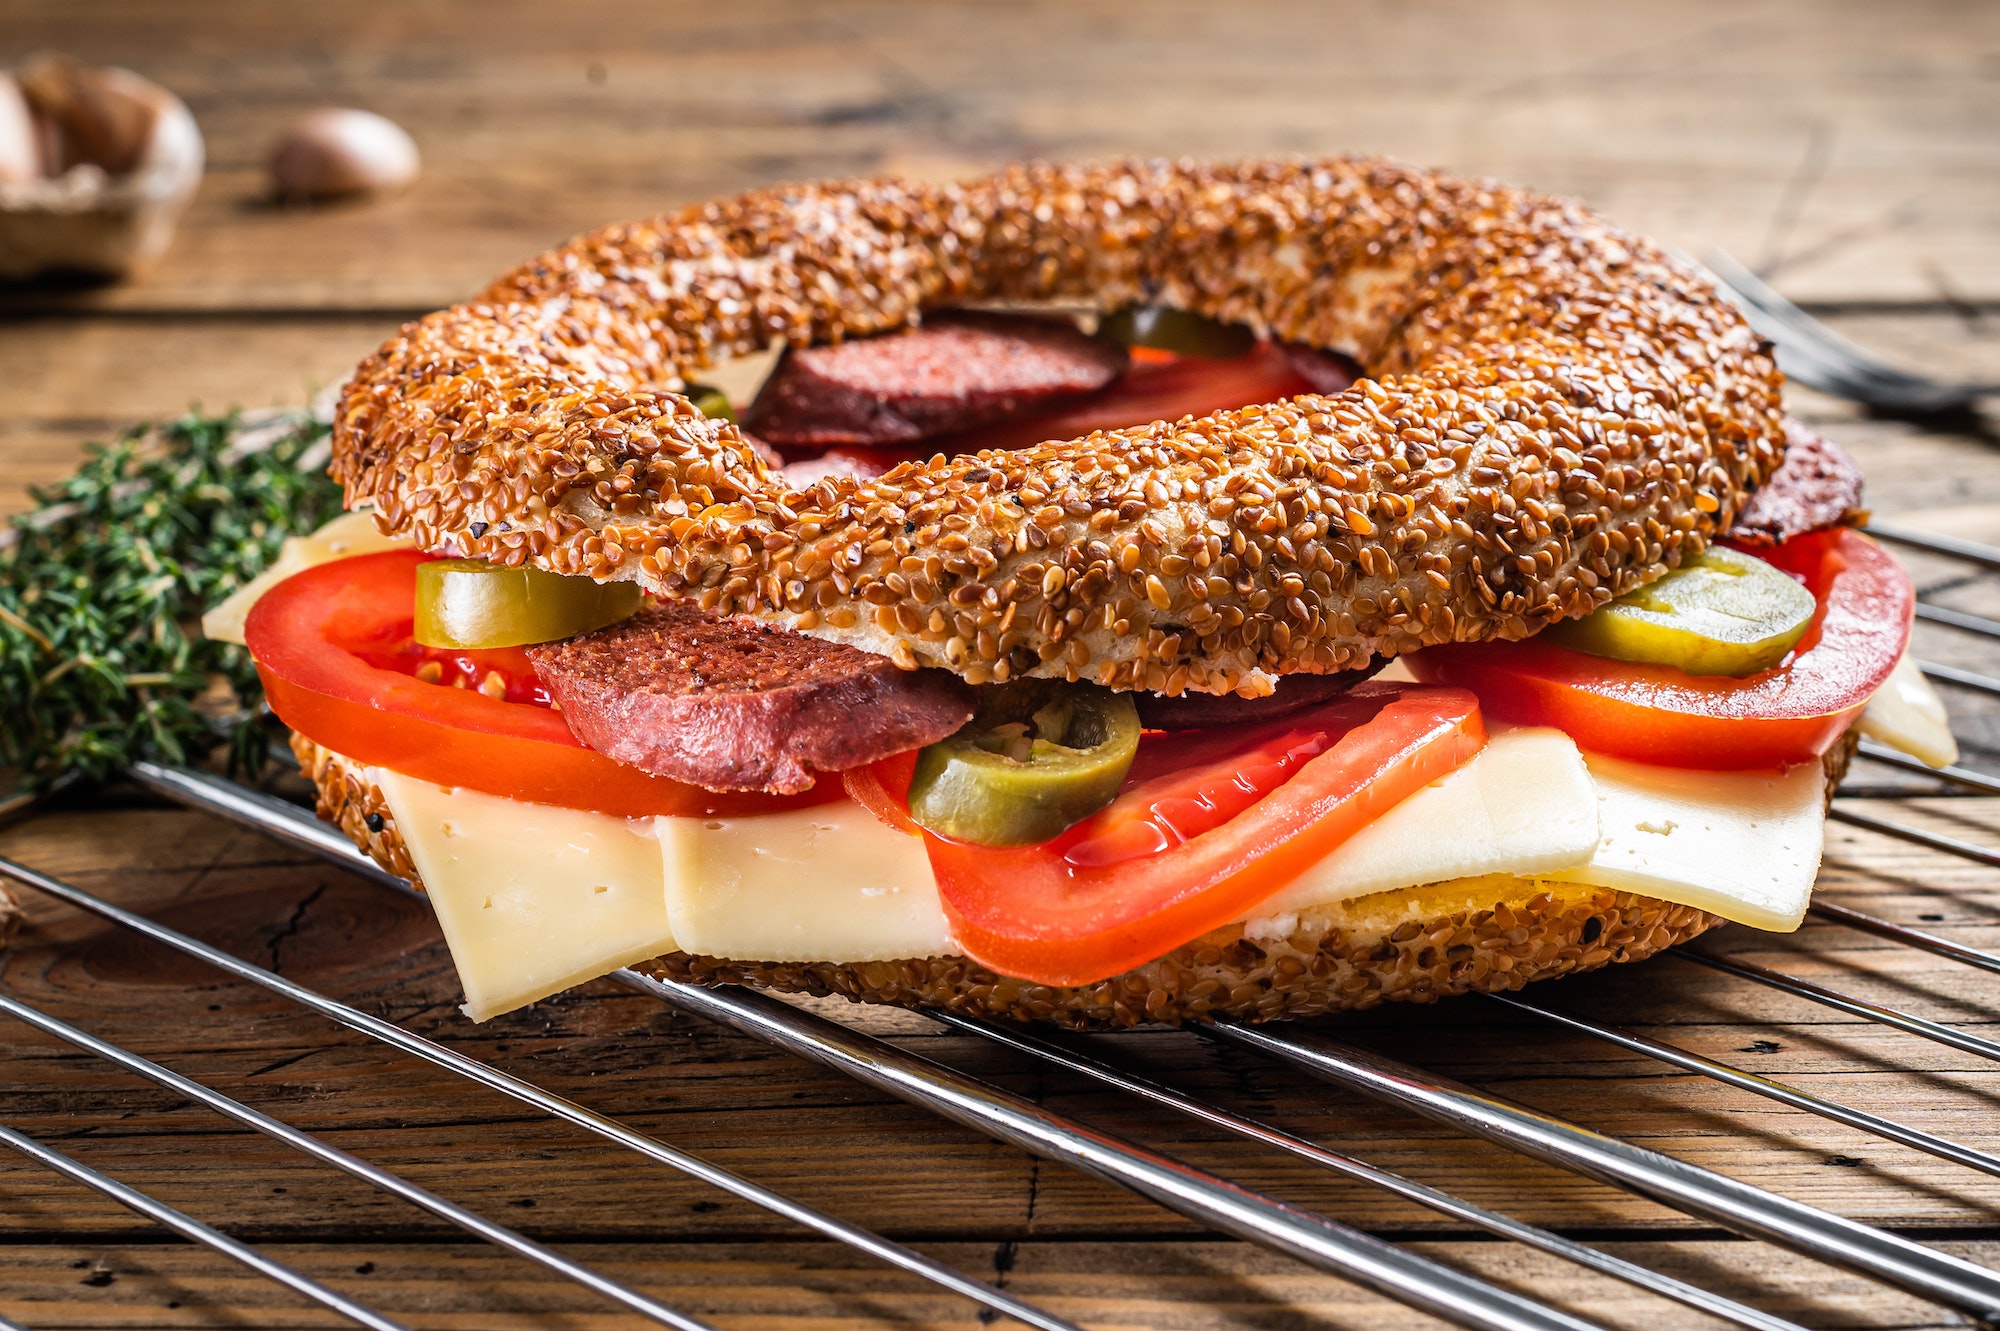 Bagel sandwich with lettuce, tomato, yellow cheese and sausages. Wooden background. Top view